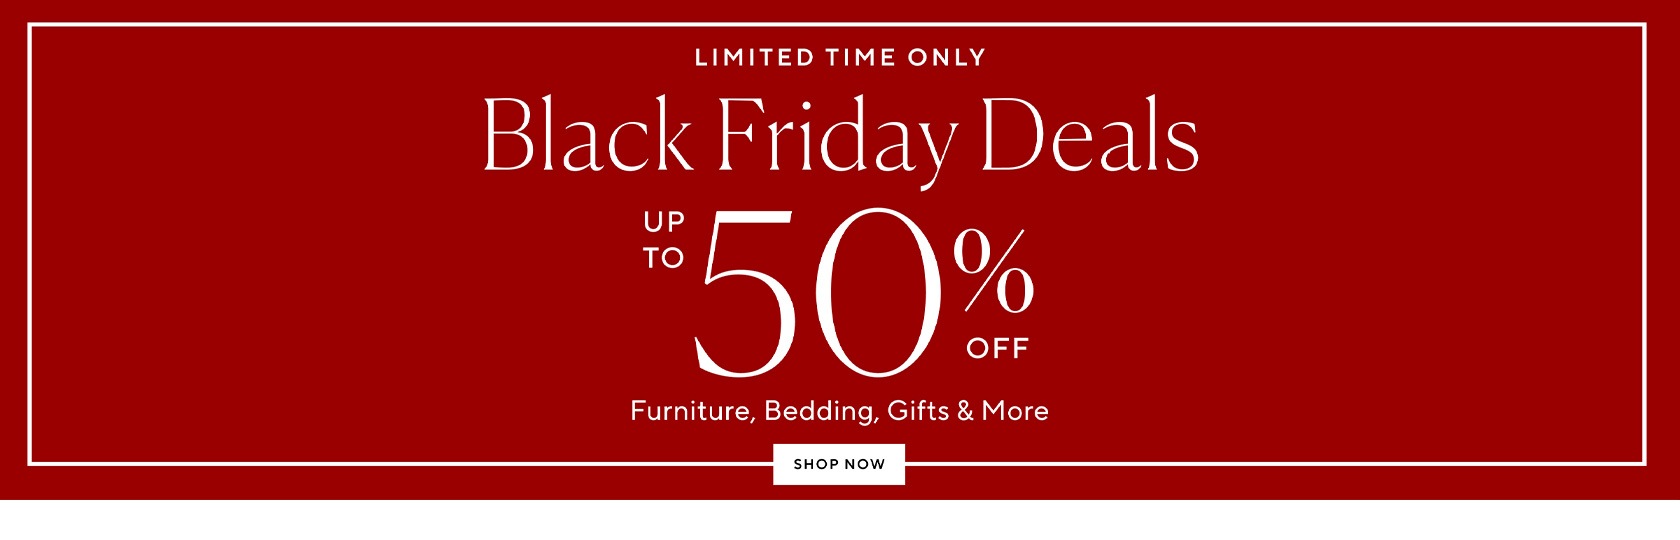 Black Friday Deals > Up to 50% Off